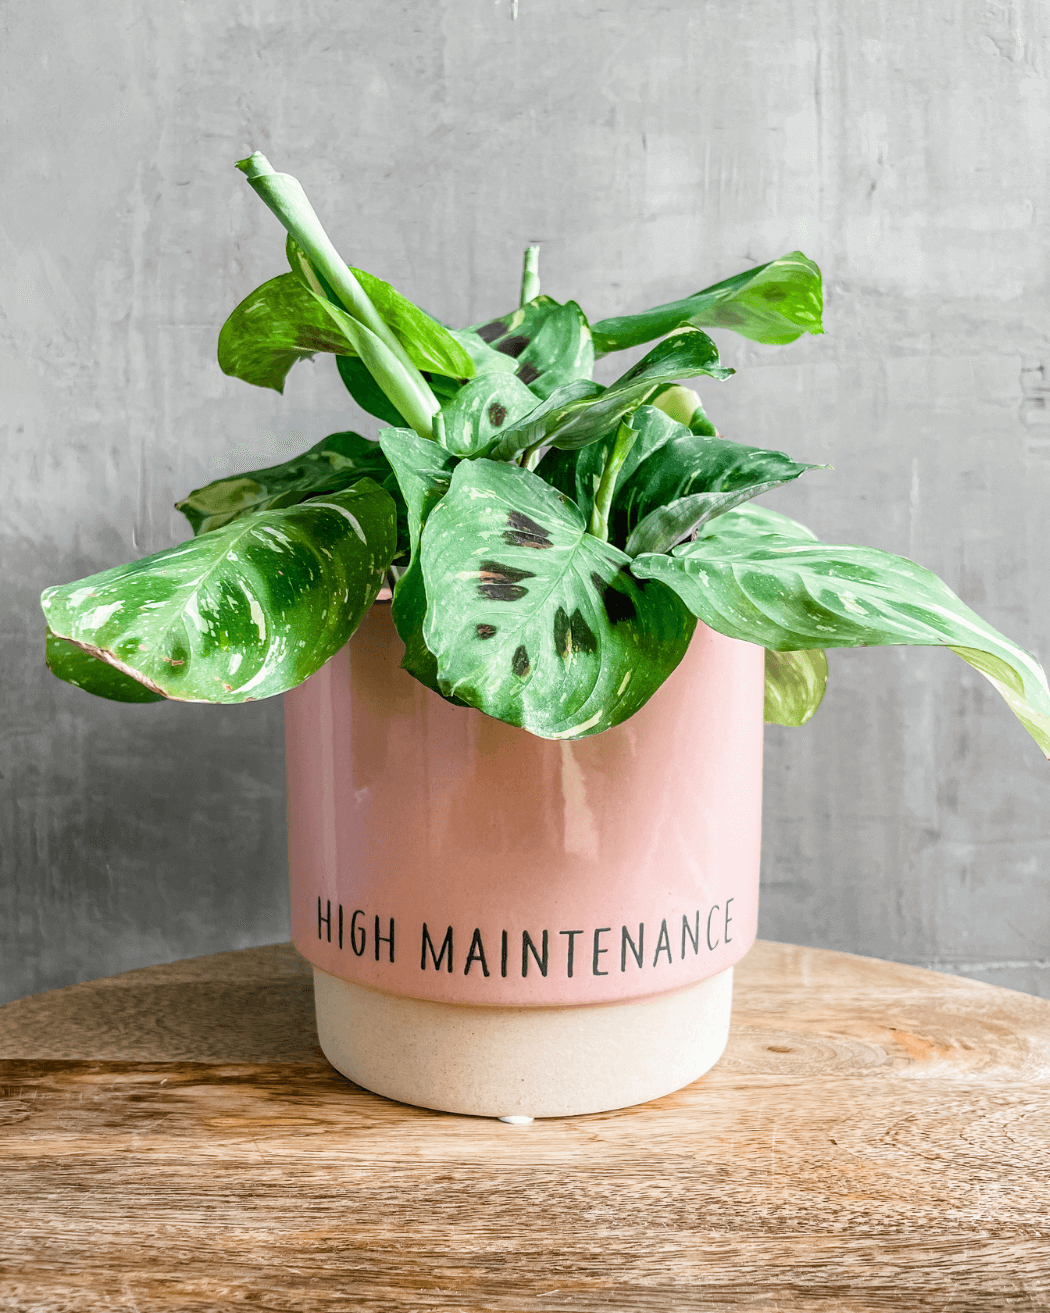 Affordable Sustainable Gifts - High Maintenance Planter Pot